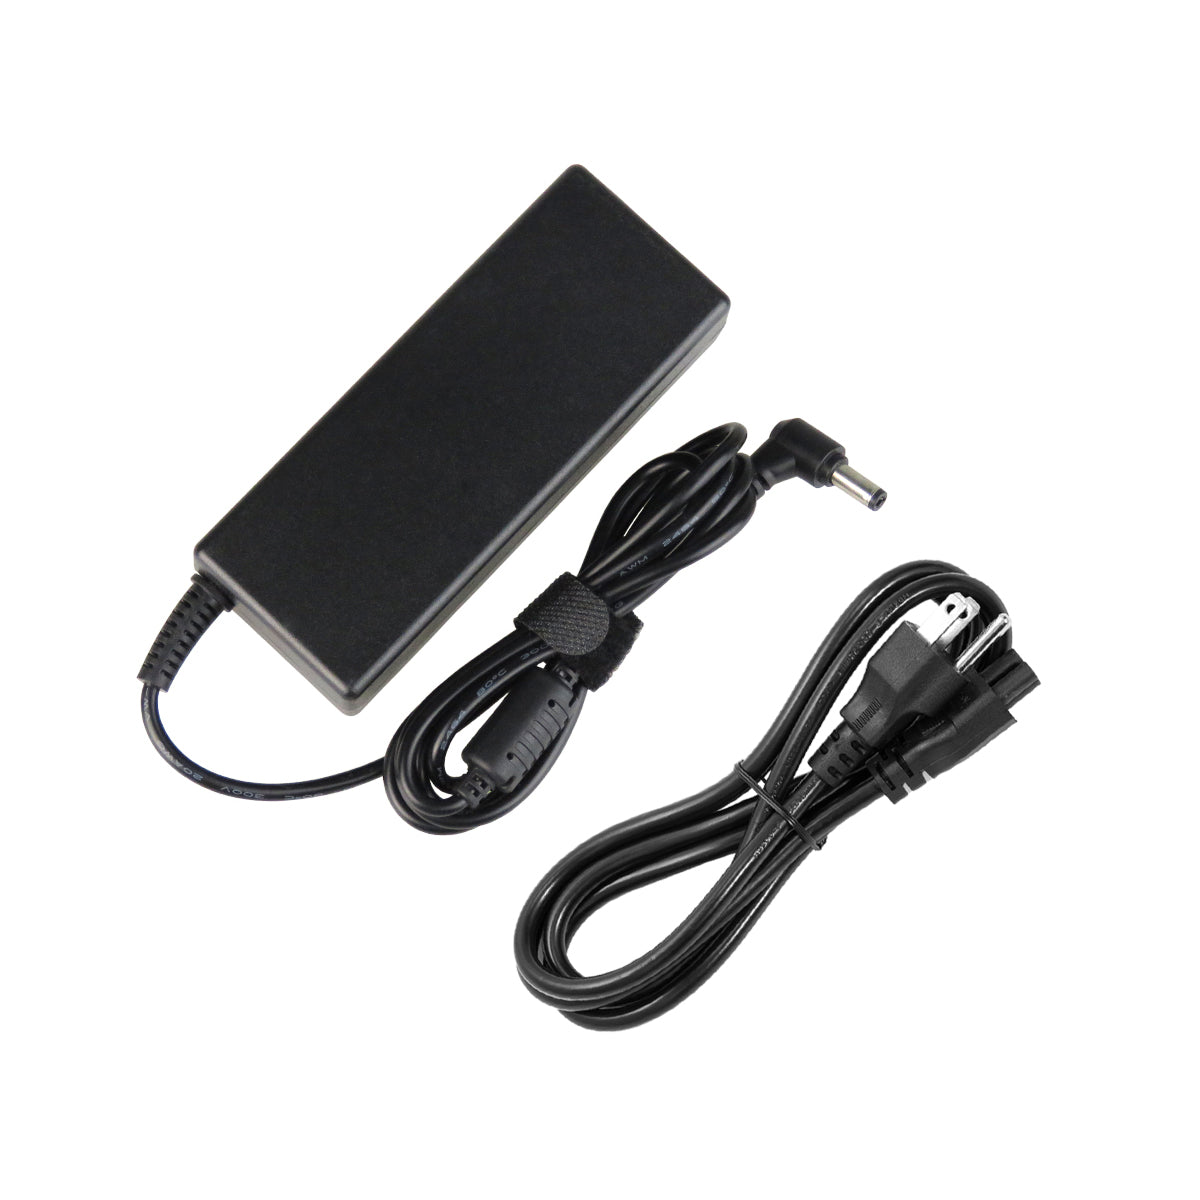 AC Adapter Charger for ASUS A8Sr Laptop.